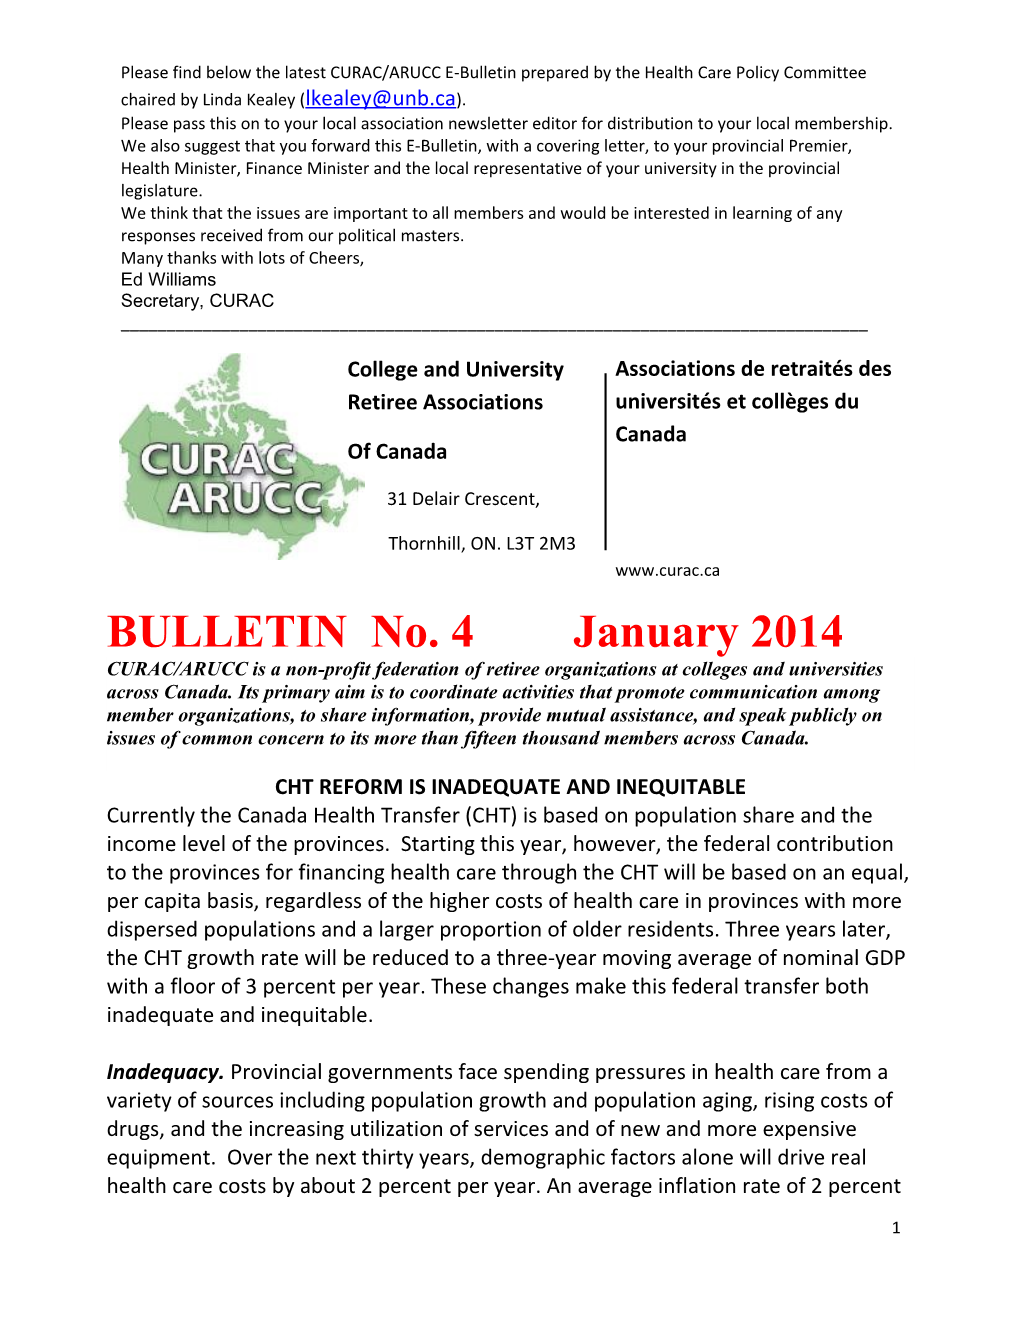 Please Find Below the Latest CURAC/ARUCC E-Bulletin Prepared by the Health Care Policy